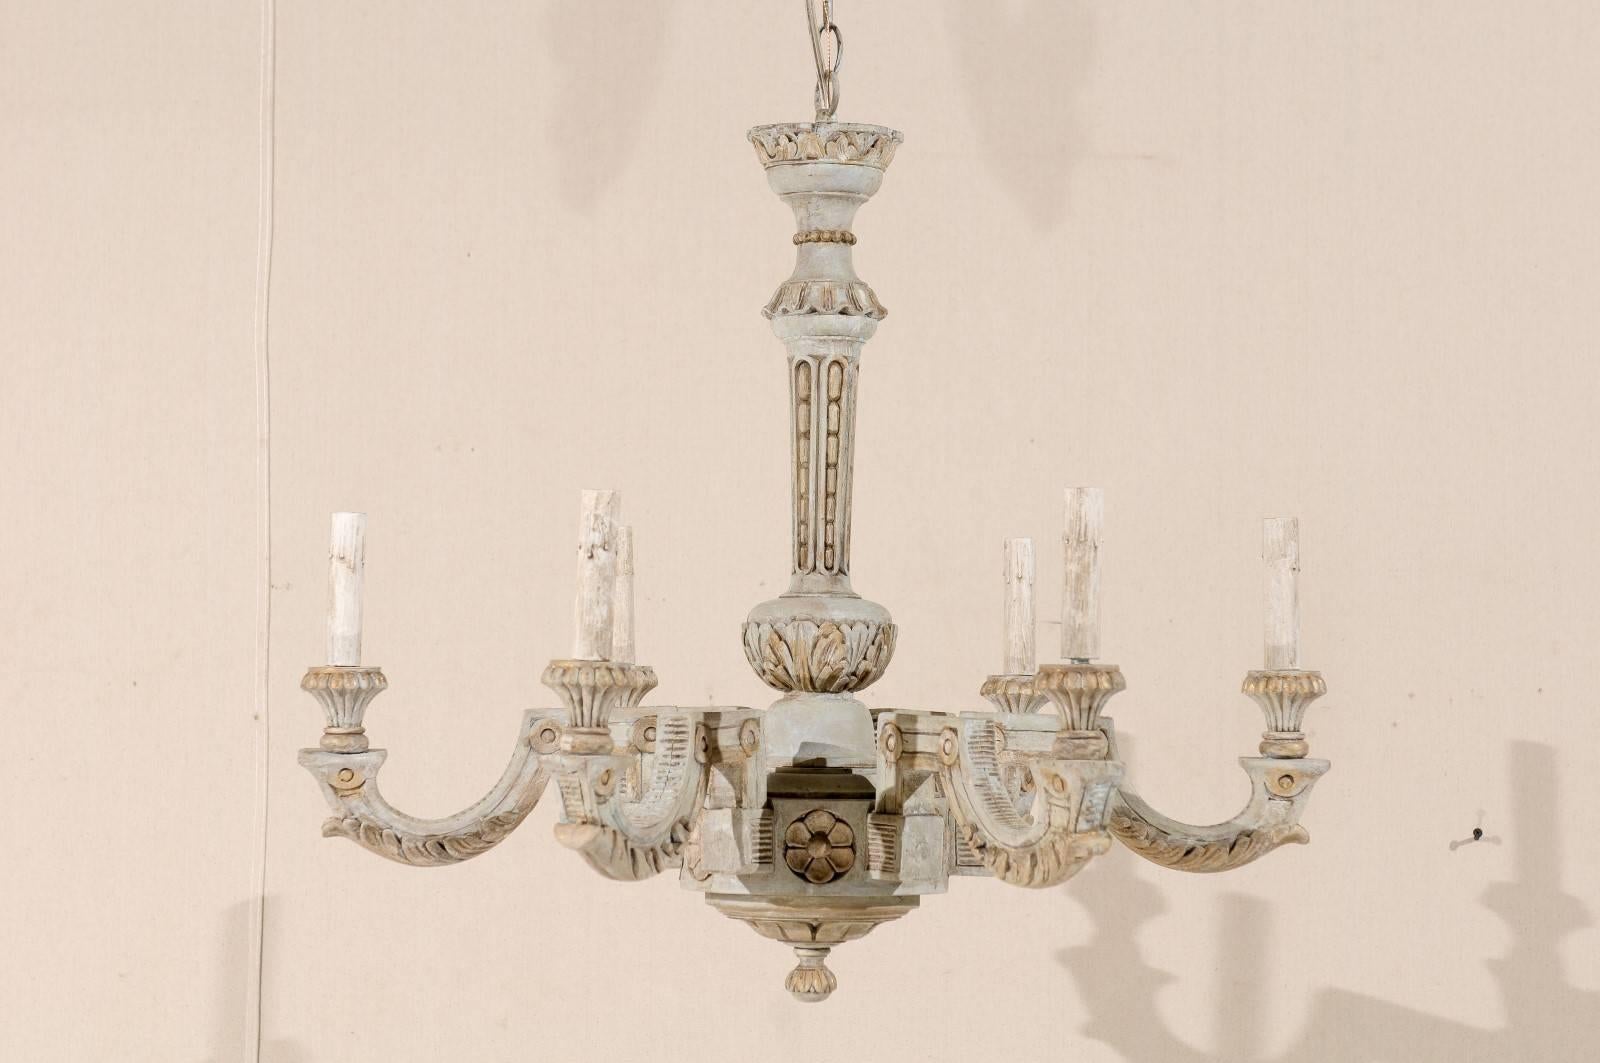 A French vintage six-light painted and carved wood chandelier. This French chandelier from the mid-20th century features a central column with carved foliage decor. The chandelier has six arms with interesting shapes which go up and out at rigid 90